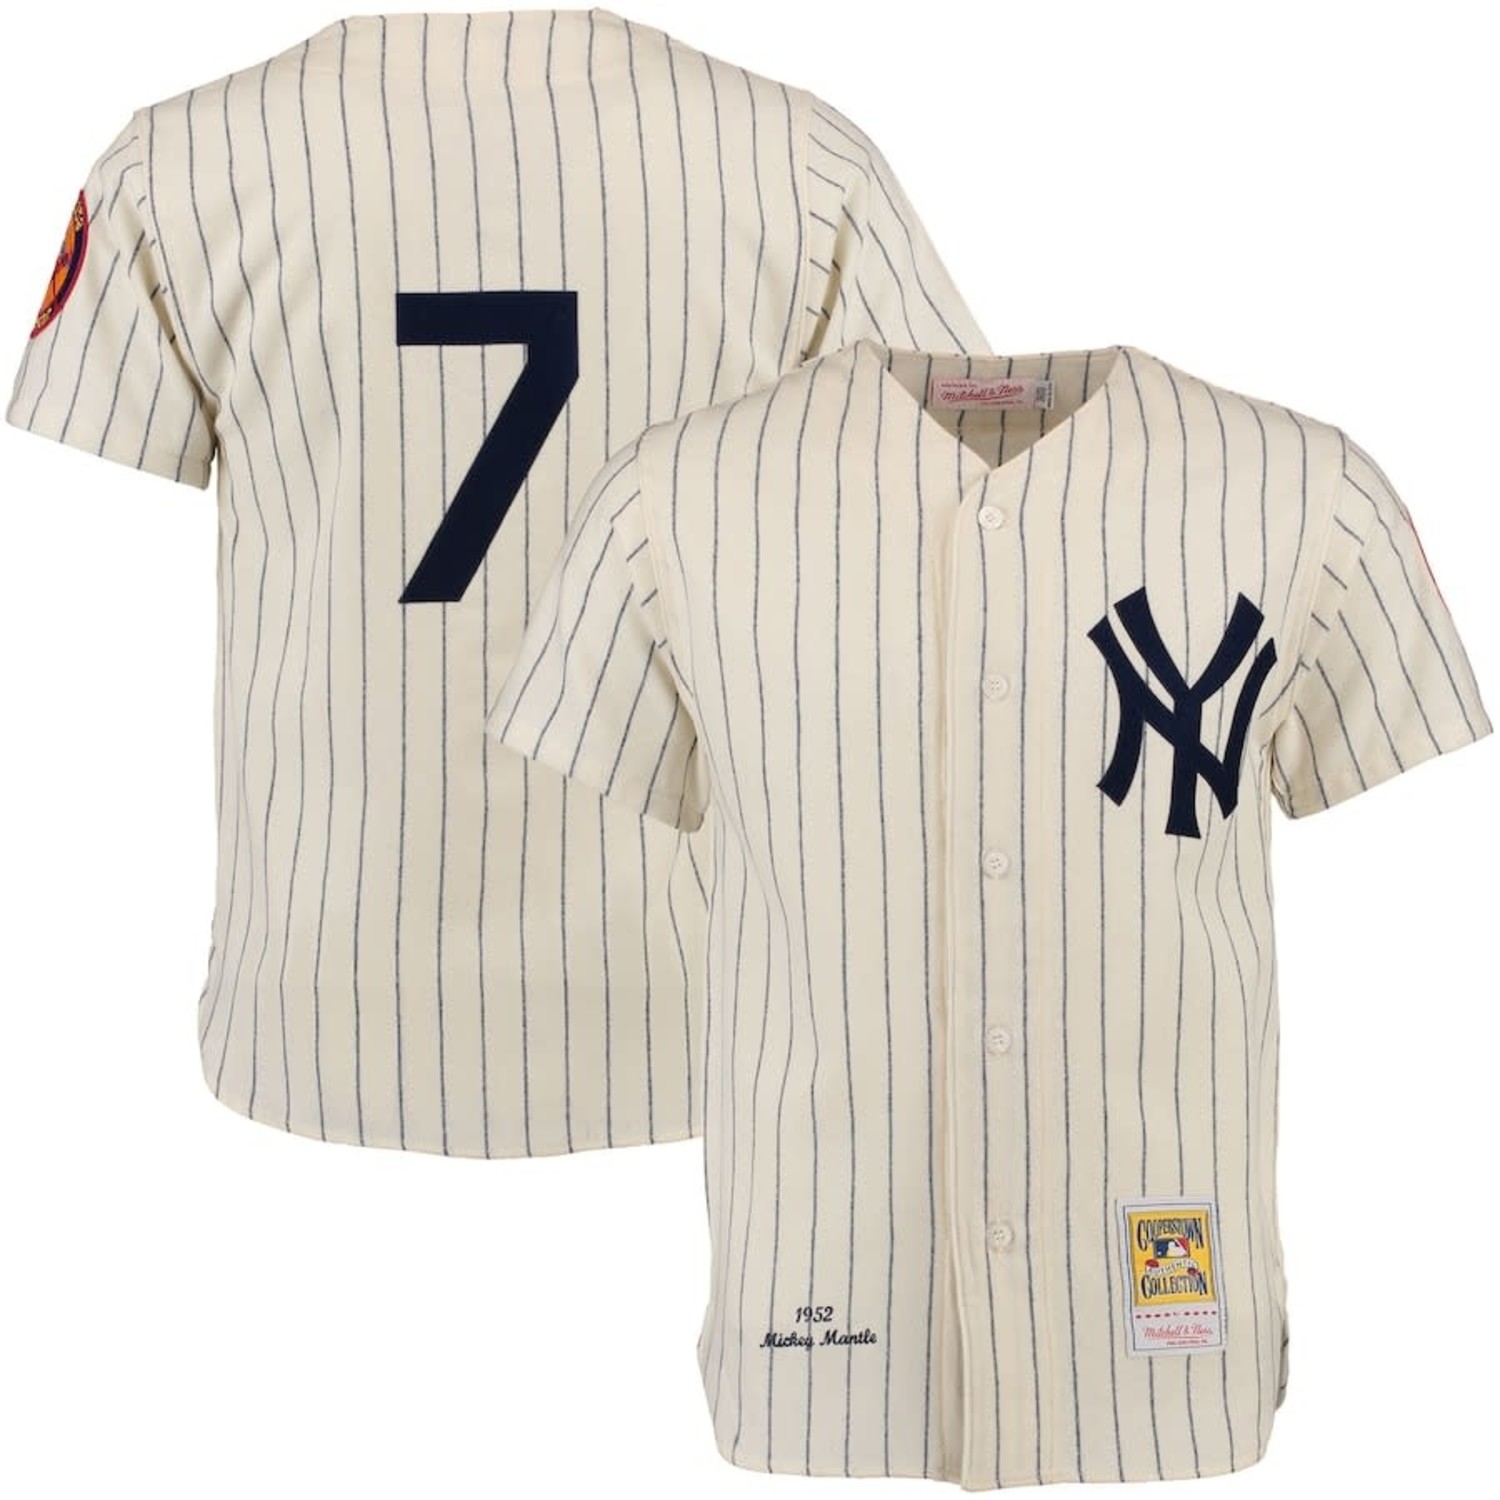 Authentic Jersey New York Yankees Home 1952 Mickey Mantle - Shop Mitchell &  Ness Authentic Jerseys and Replicas Mitchell & Ness Nostalgia Co.